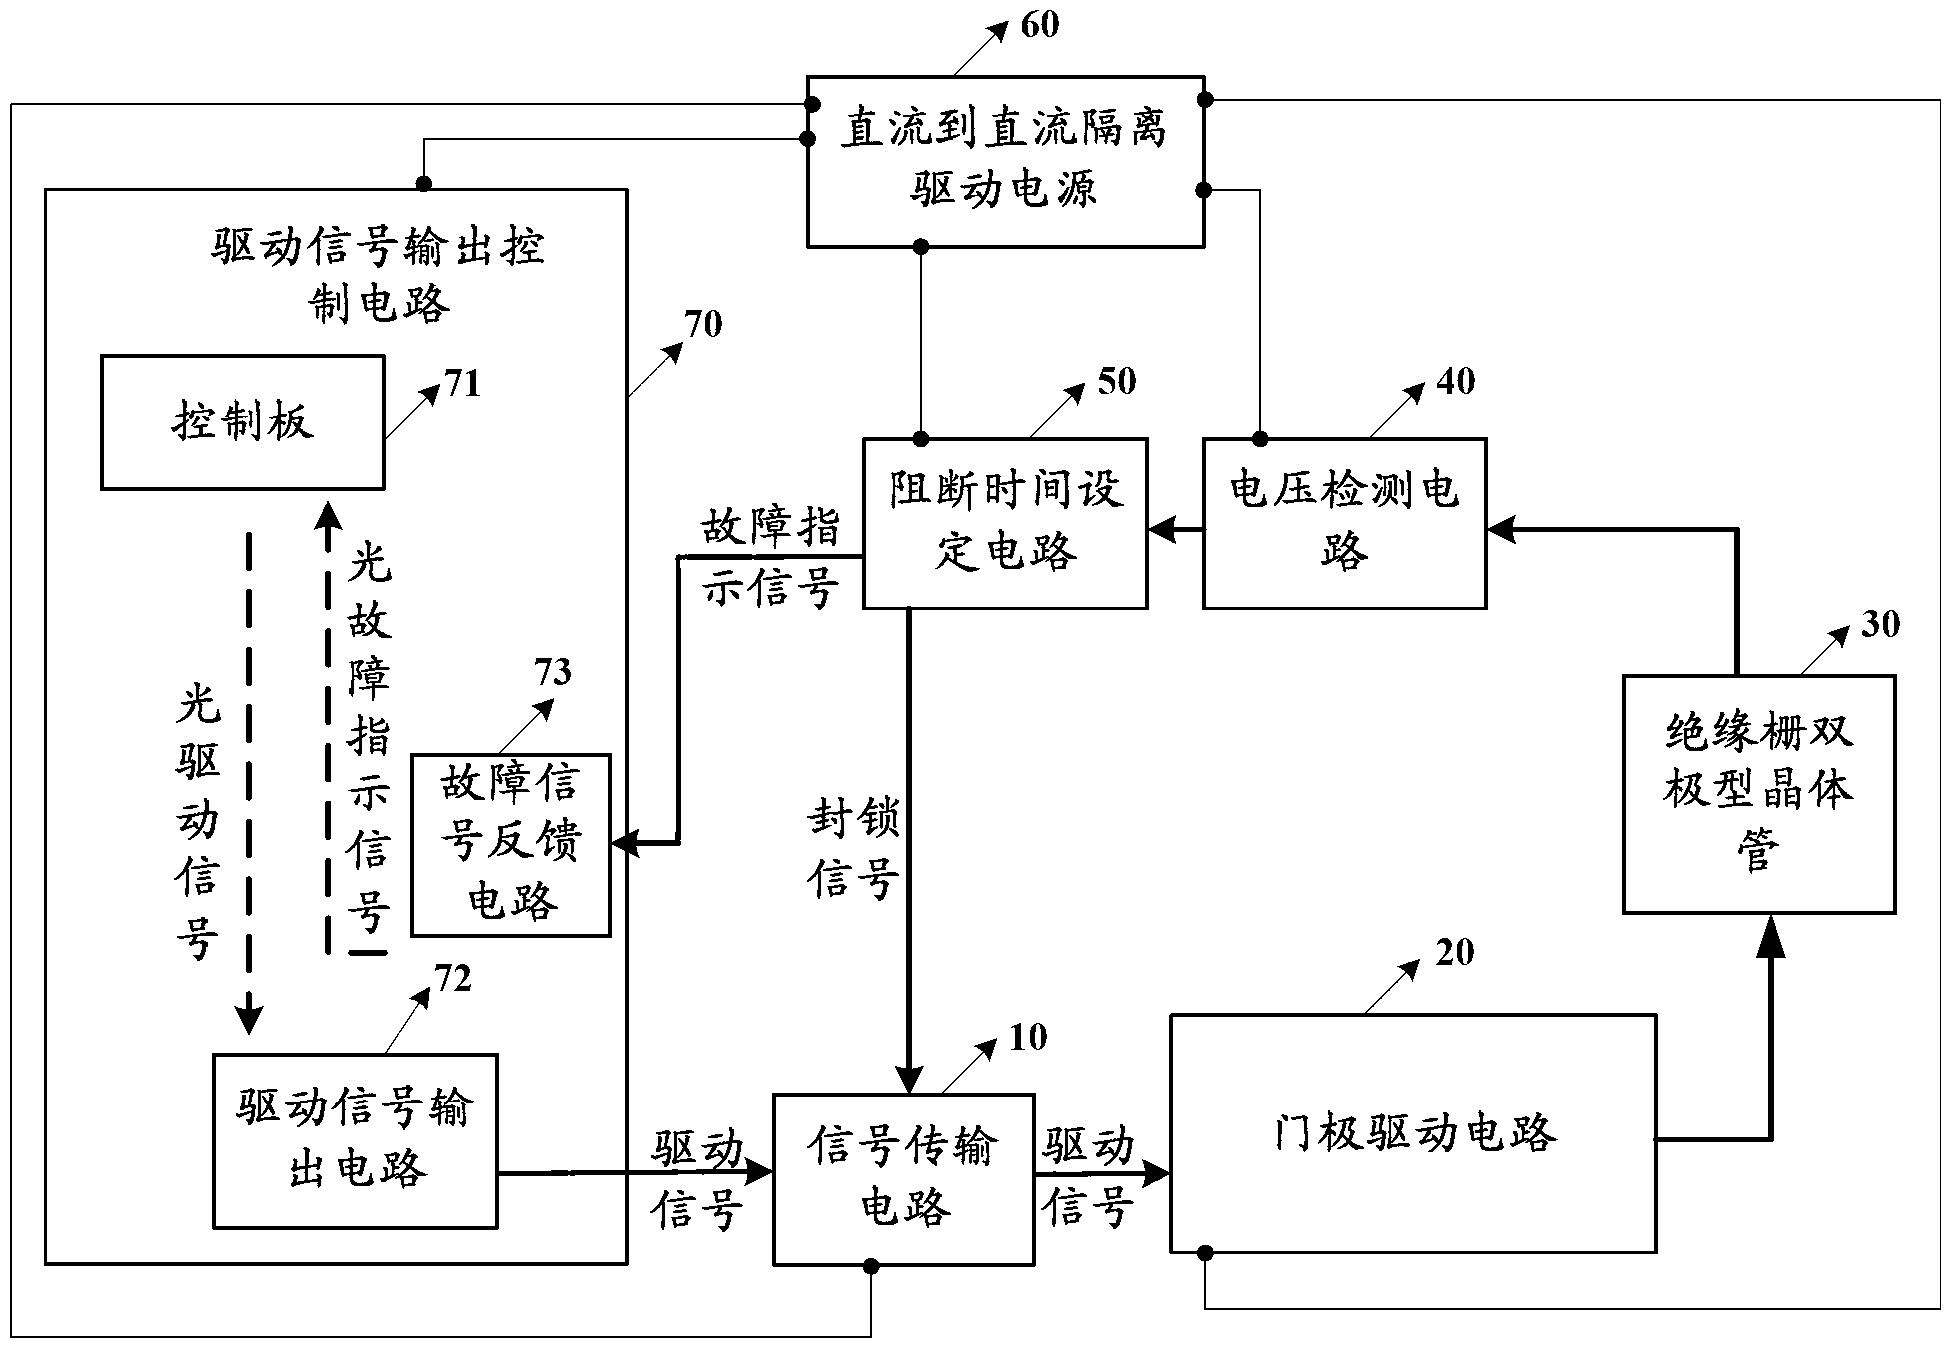 Insulated gate bipolar transistor-driven protective circuit